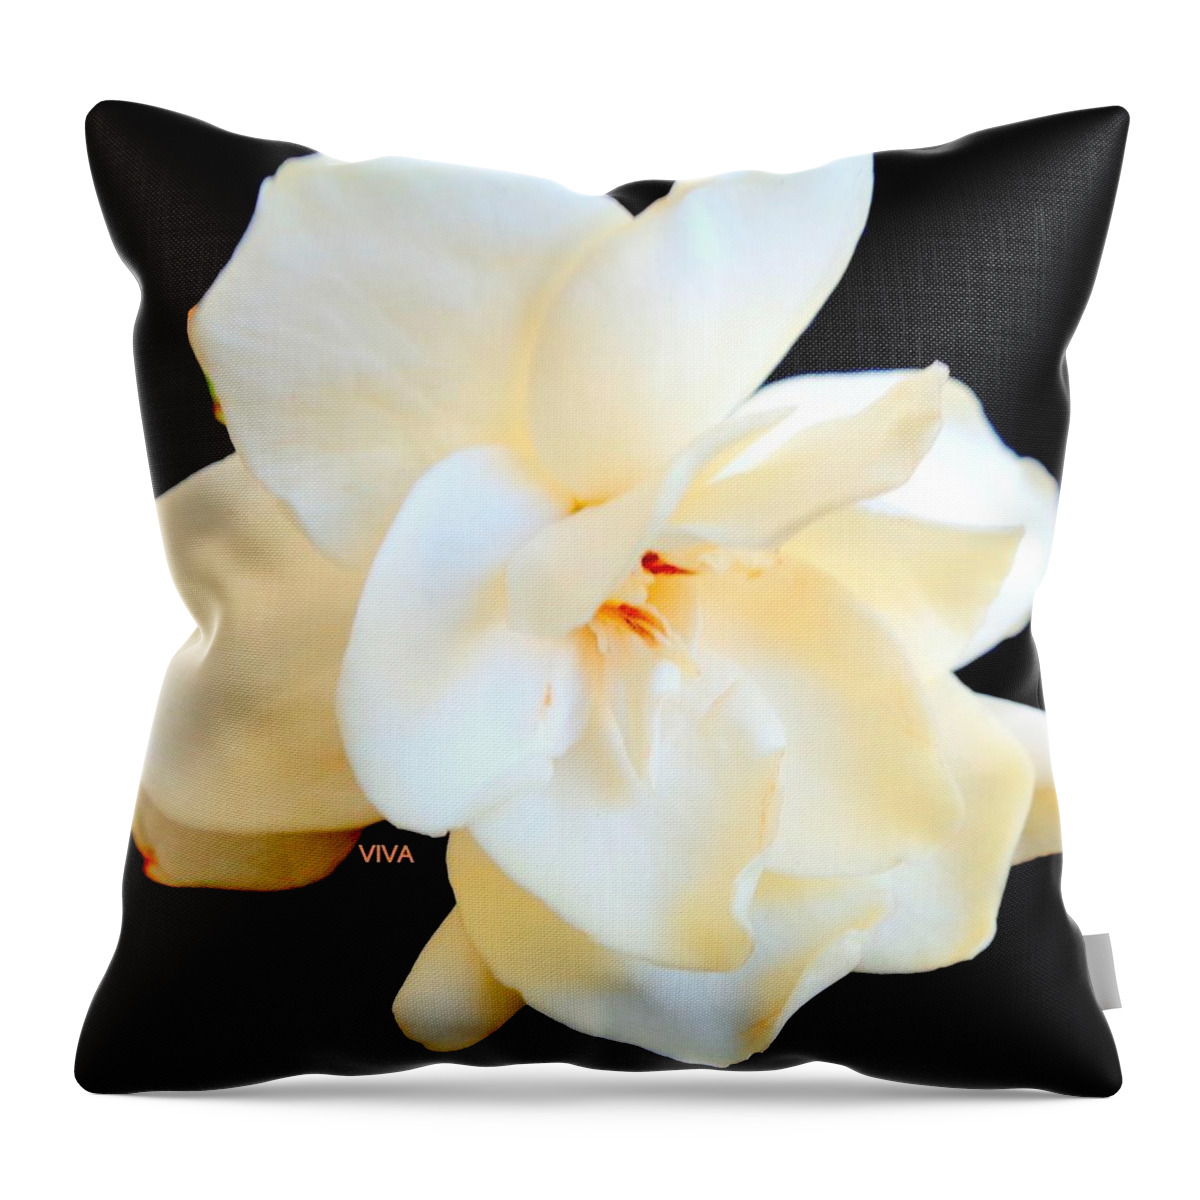 Gardenia Throw Pillow featuring the photograph Intimacy - Valentine Art by VIVA Anderson